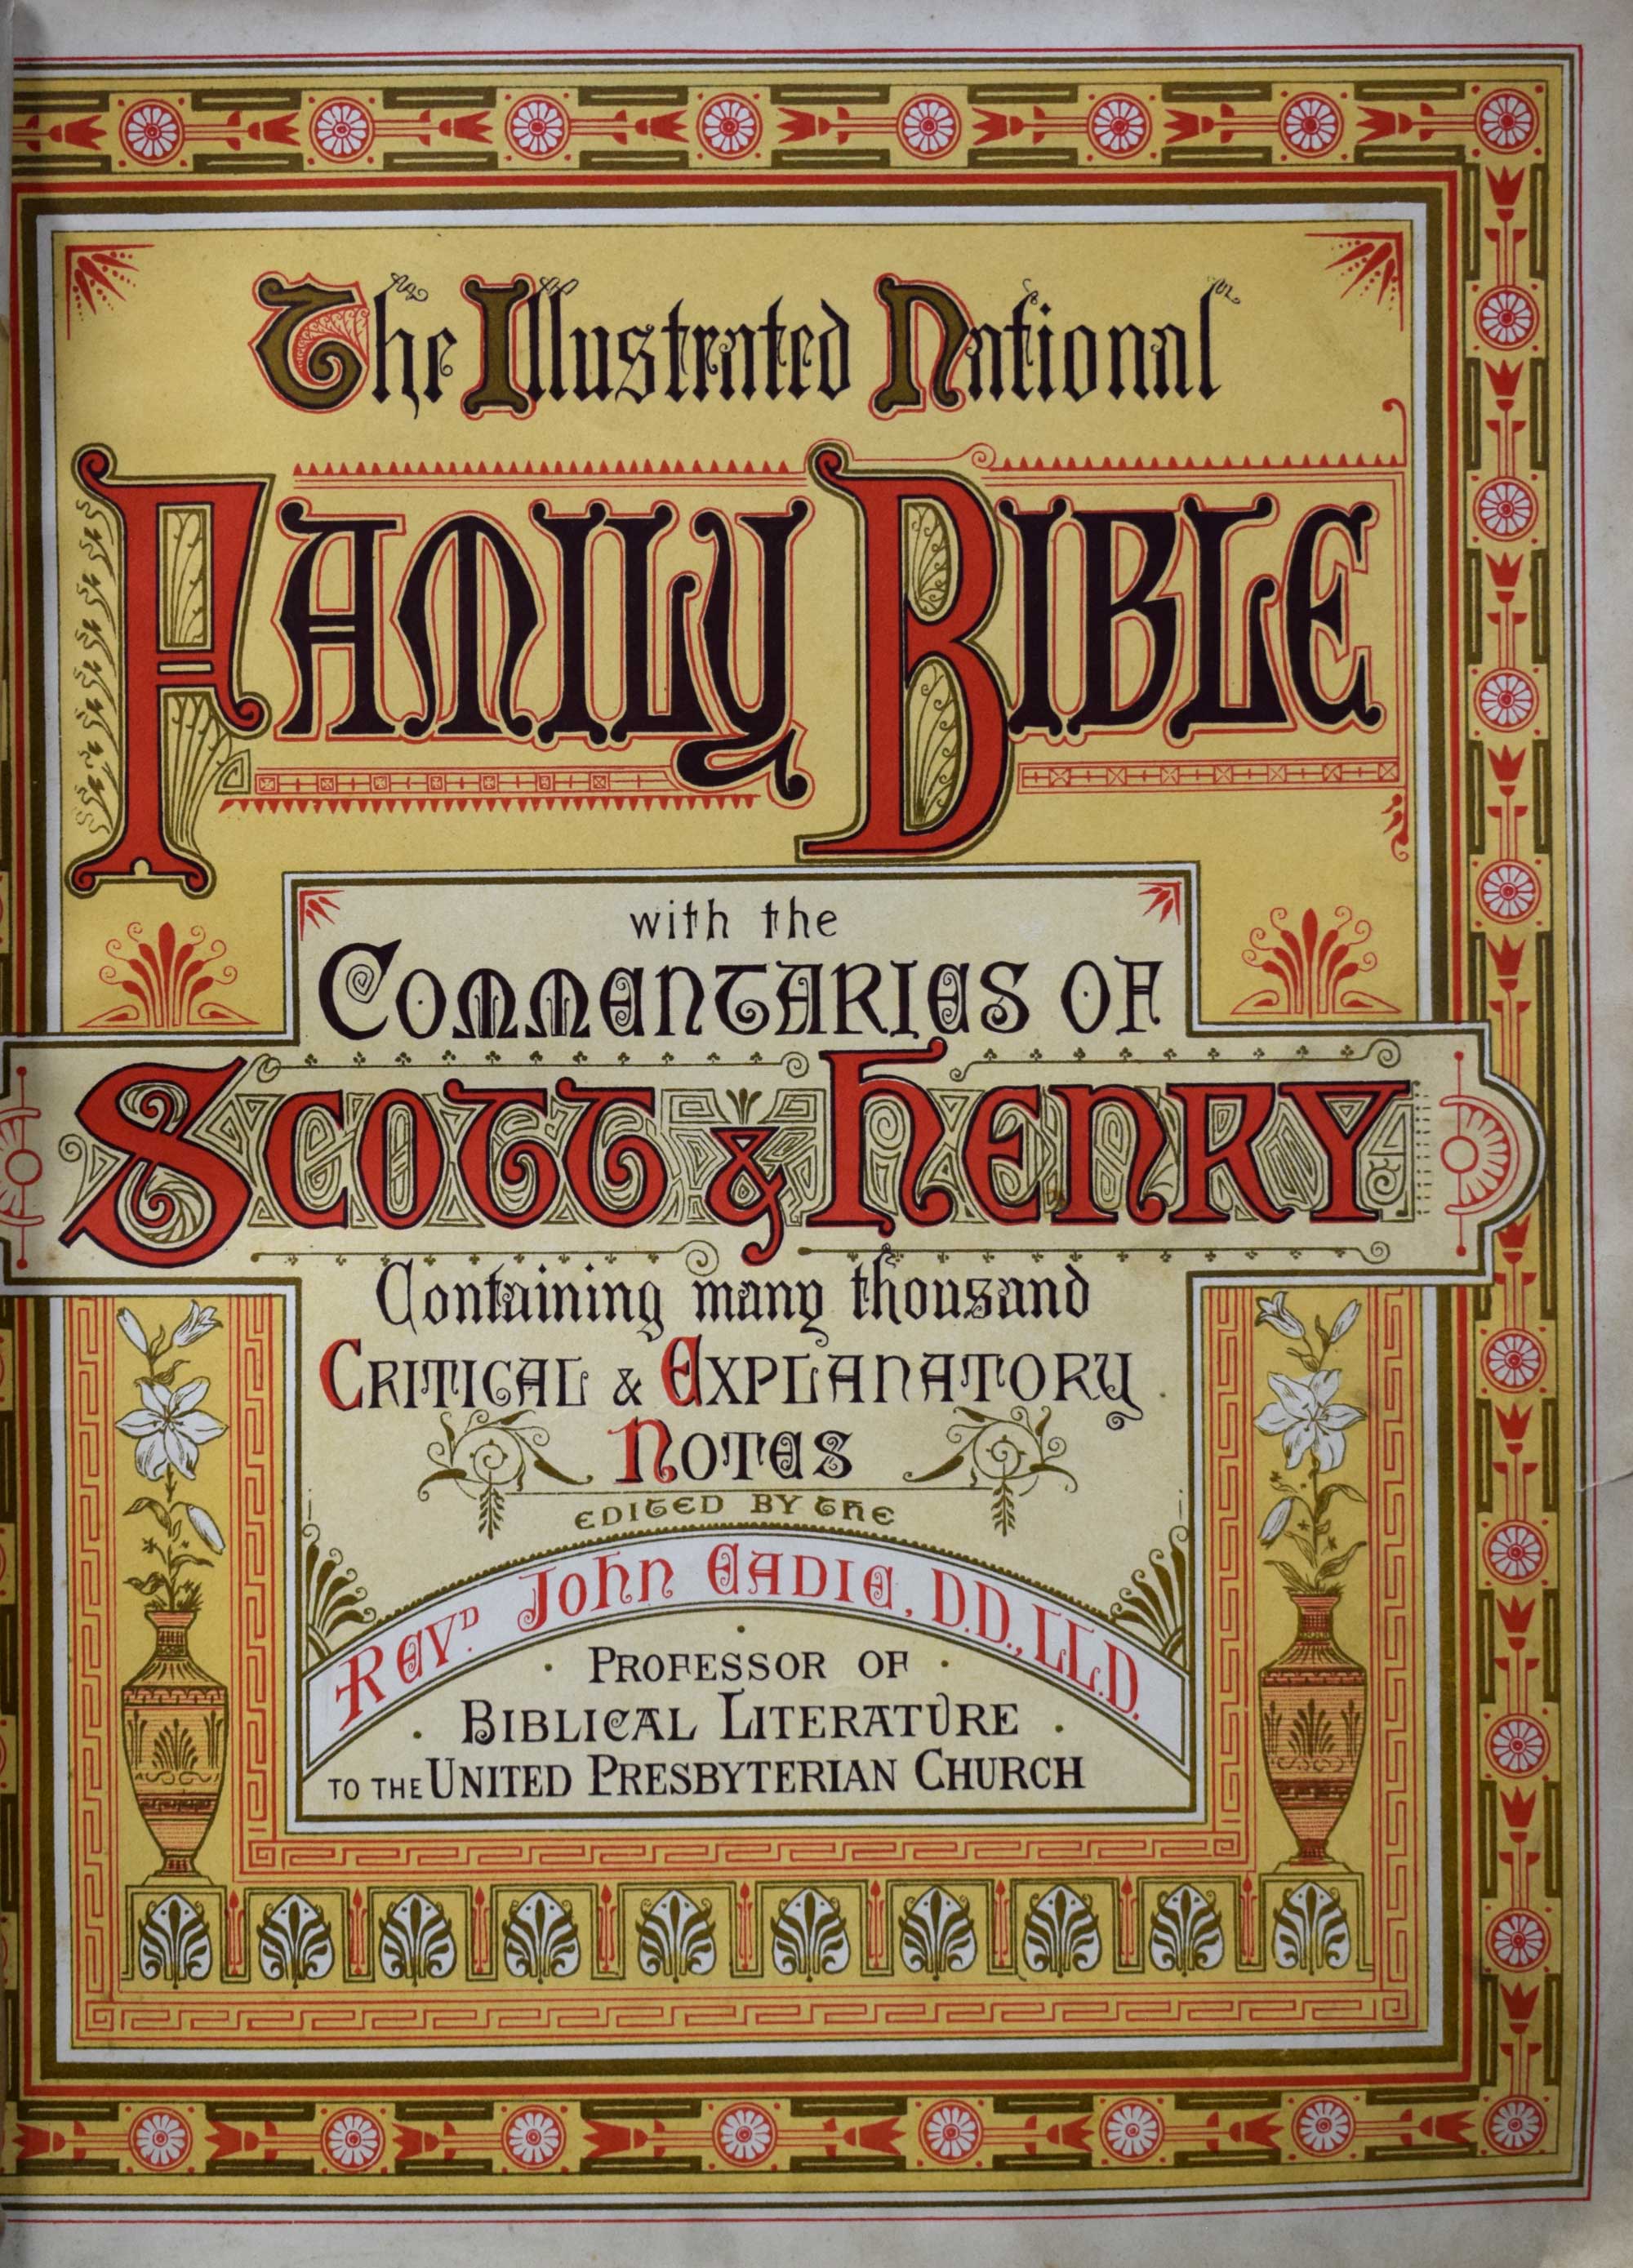 The National Comprehensive Family Bible with the Commentaries of Scott and Henry